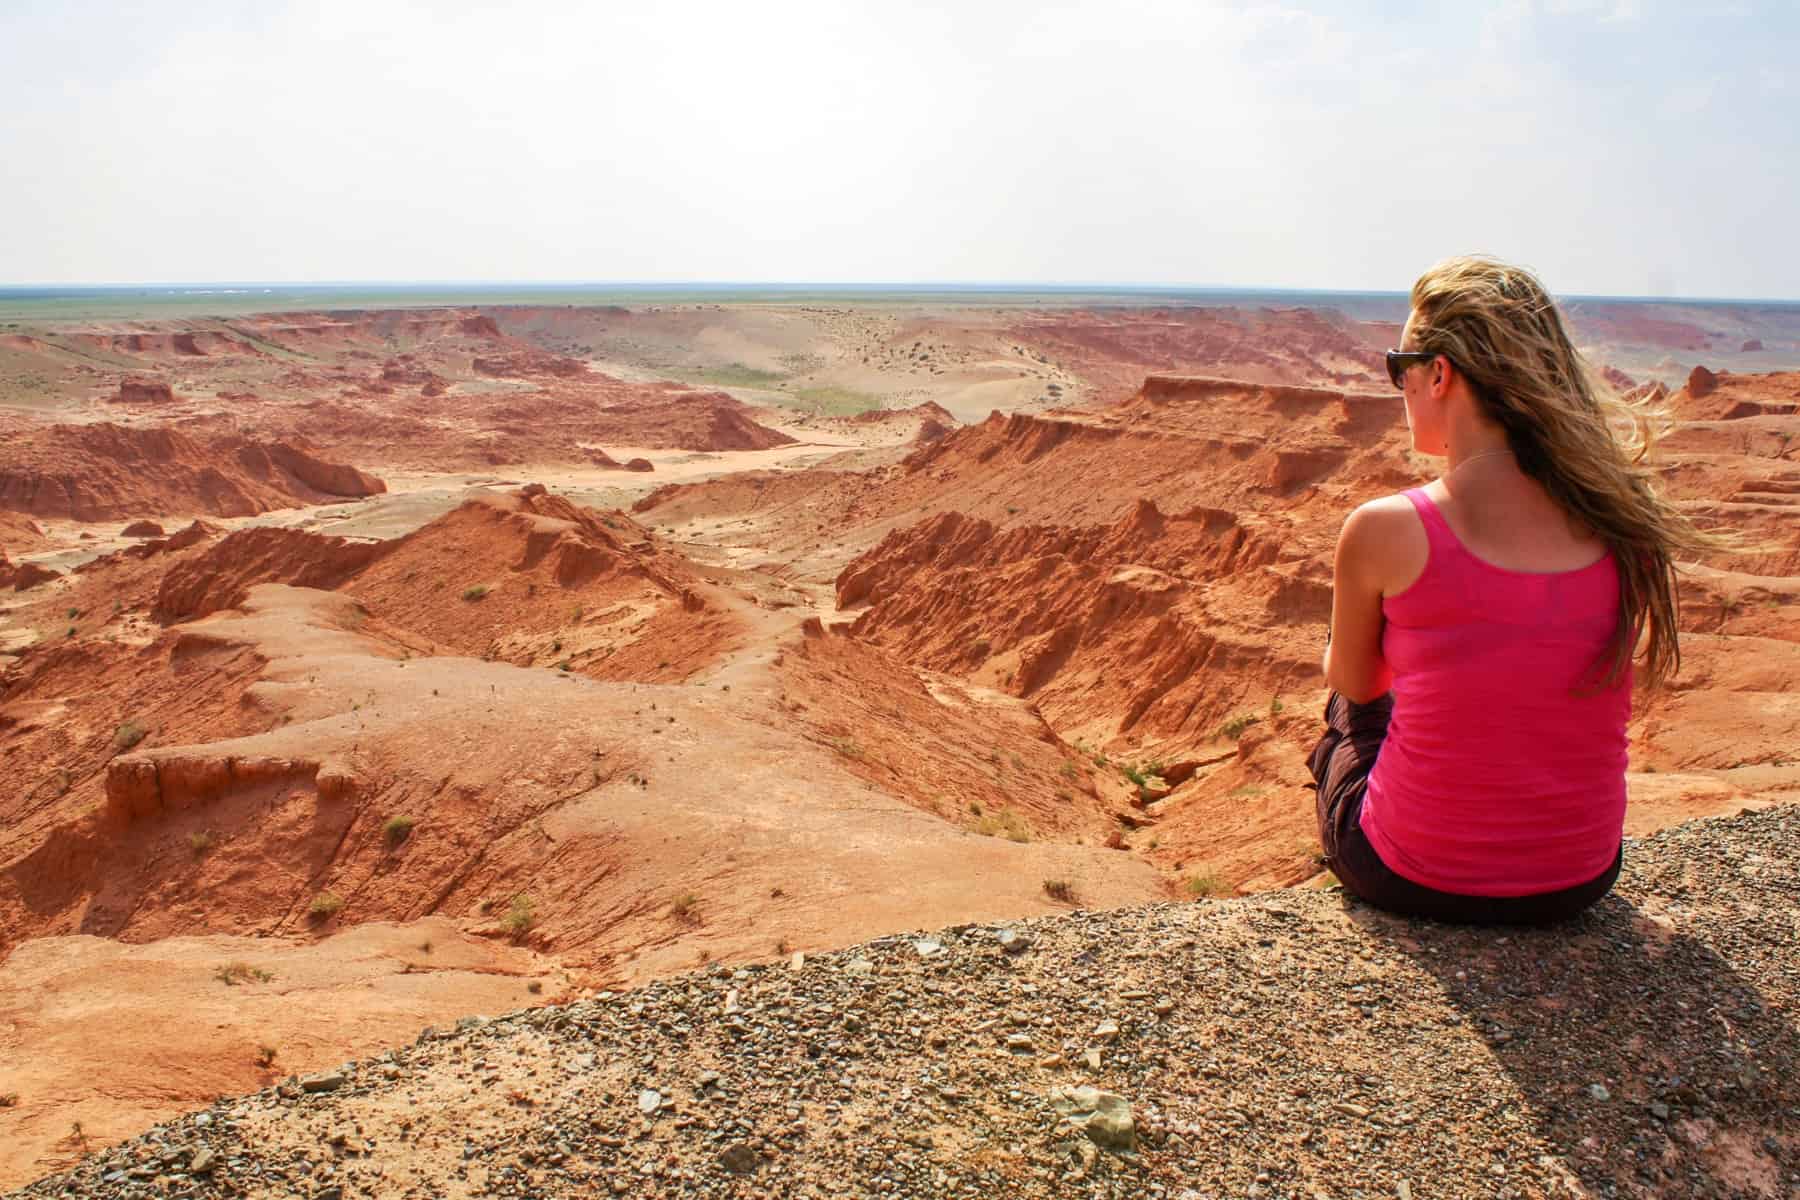 A woman sits if a rocky ledge overlooking the orange mars like landscape of Mongolia's Bayanzag Flaming Cliffs